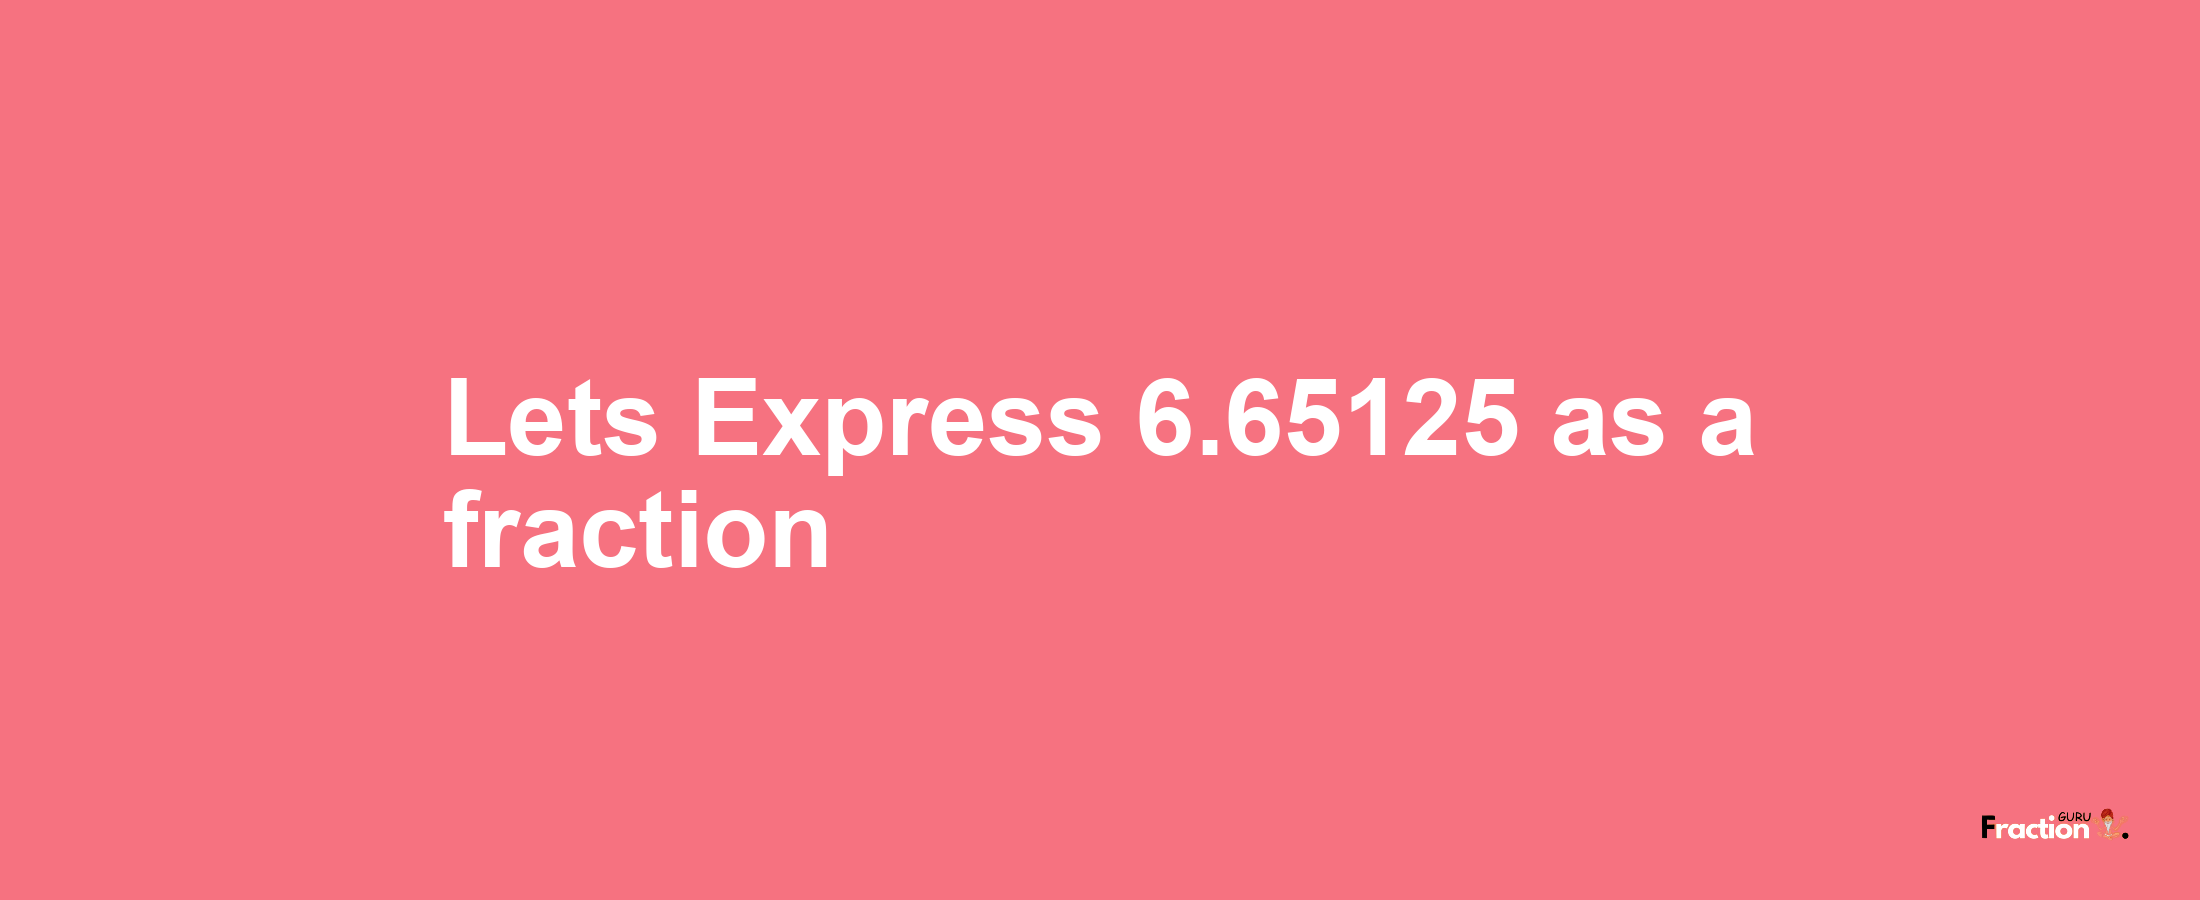 Lets Express 6.65125 as afraction